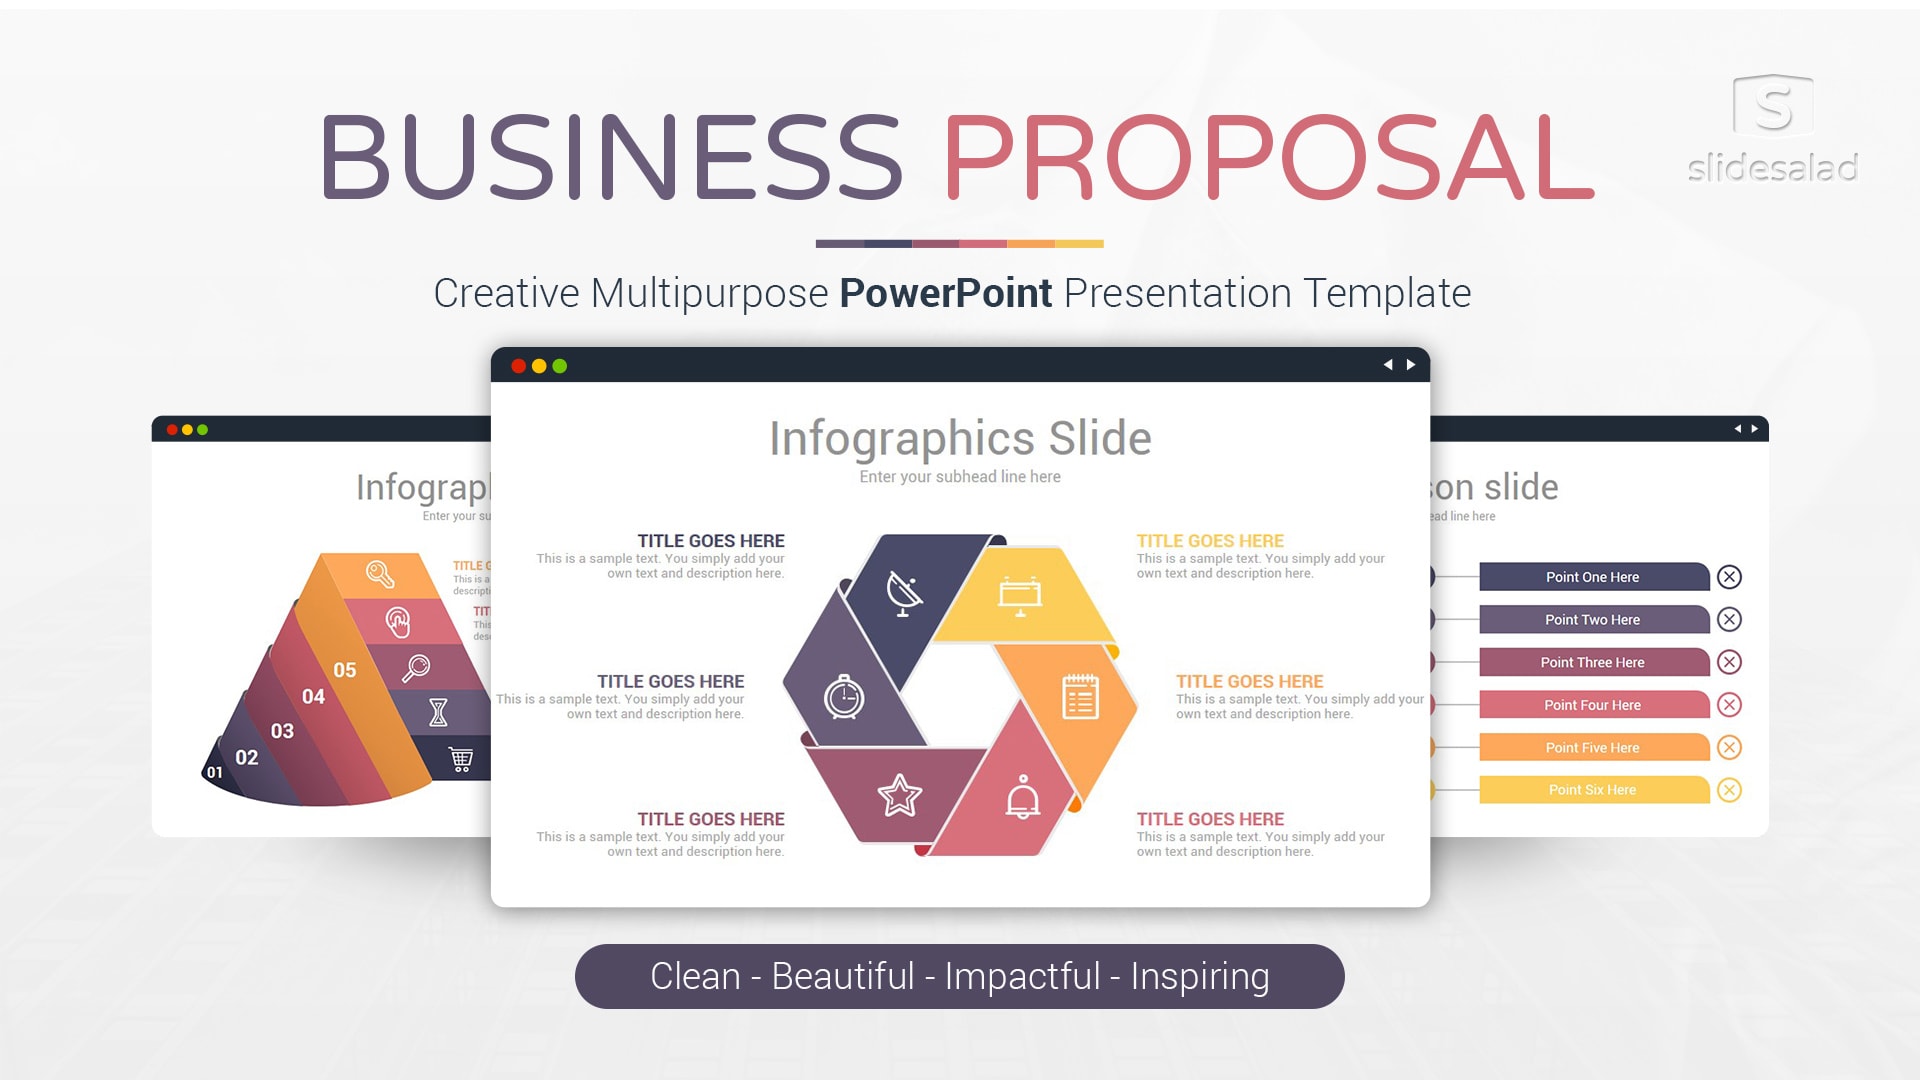 Business proposal PowerPoint Templates